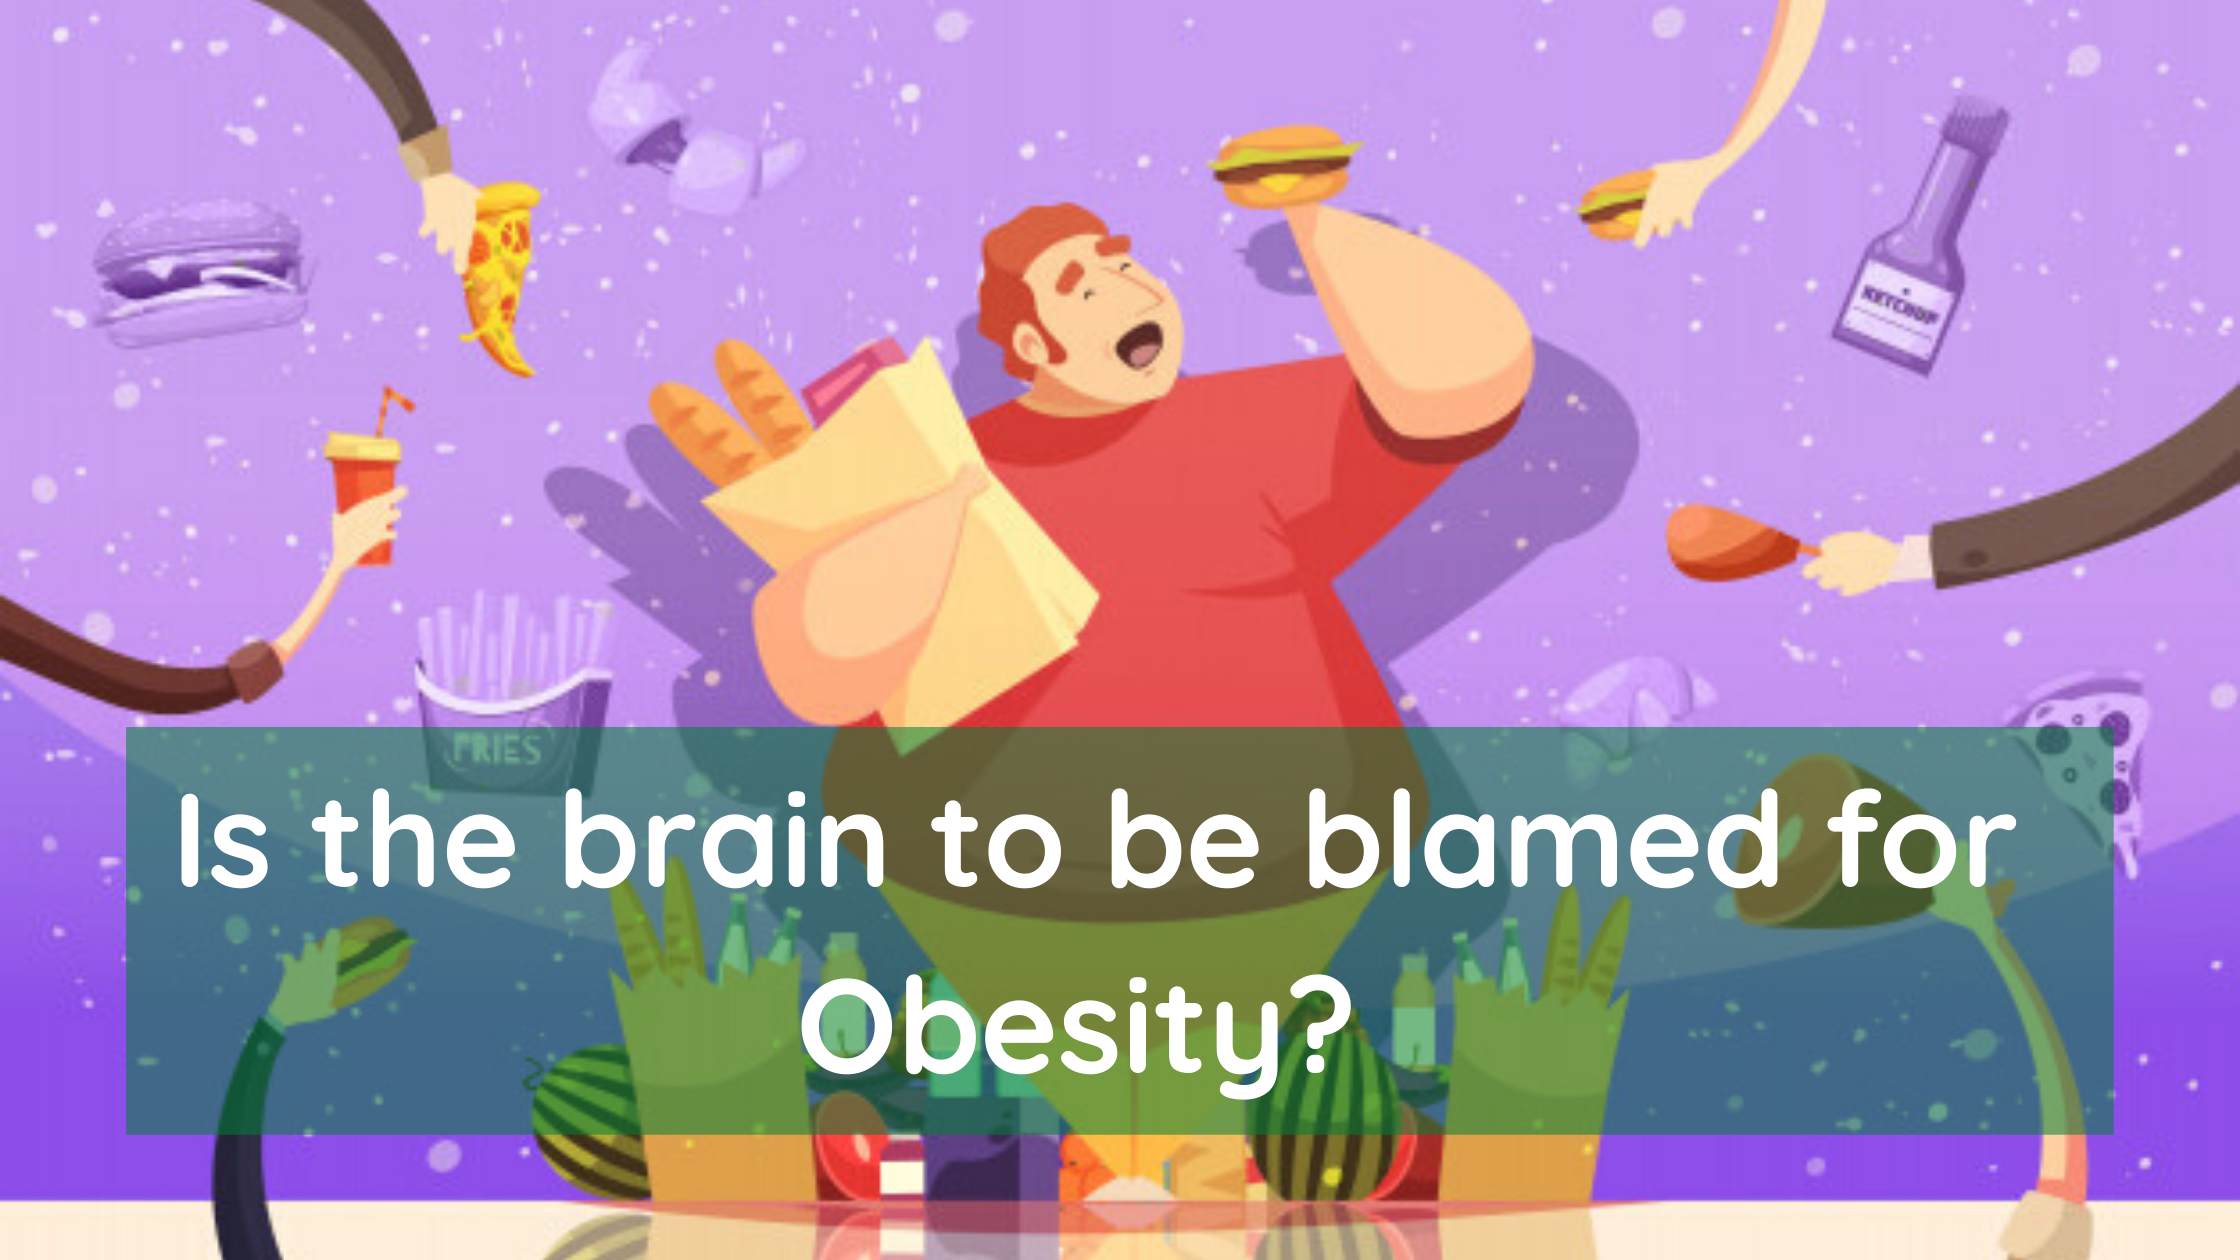 Is the brain to be blamed for Obesity?